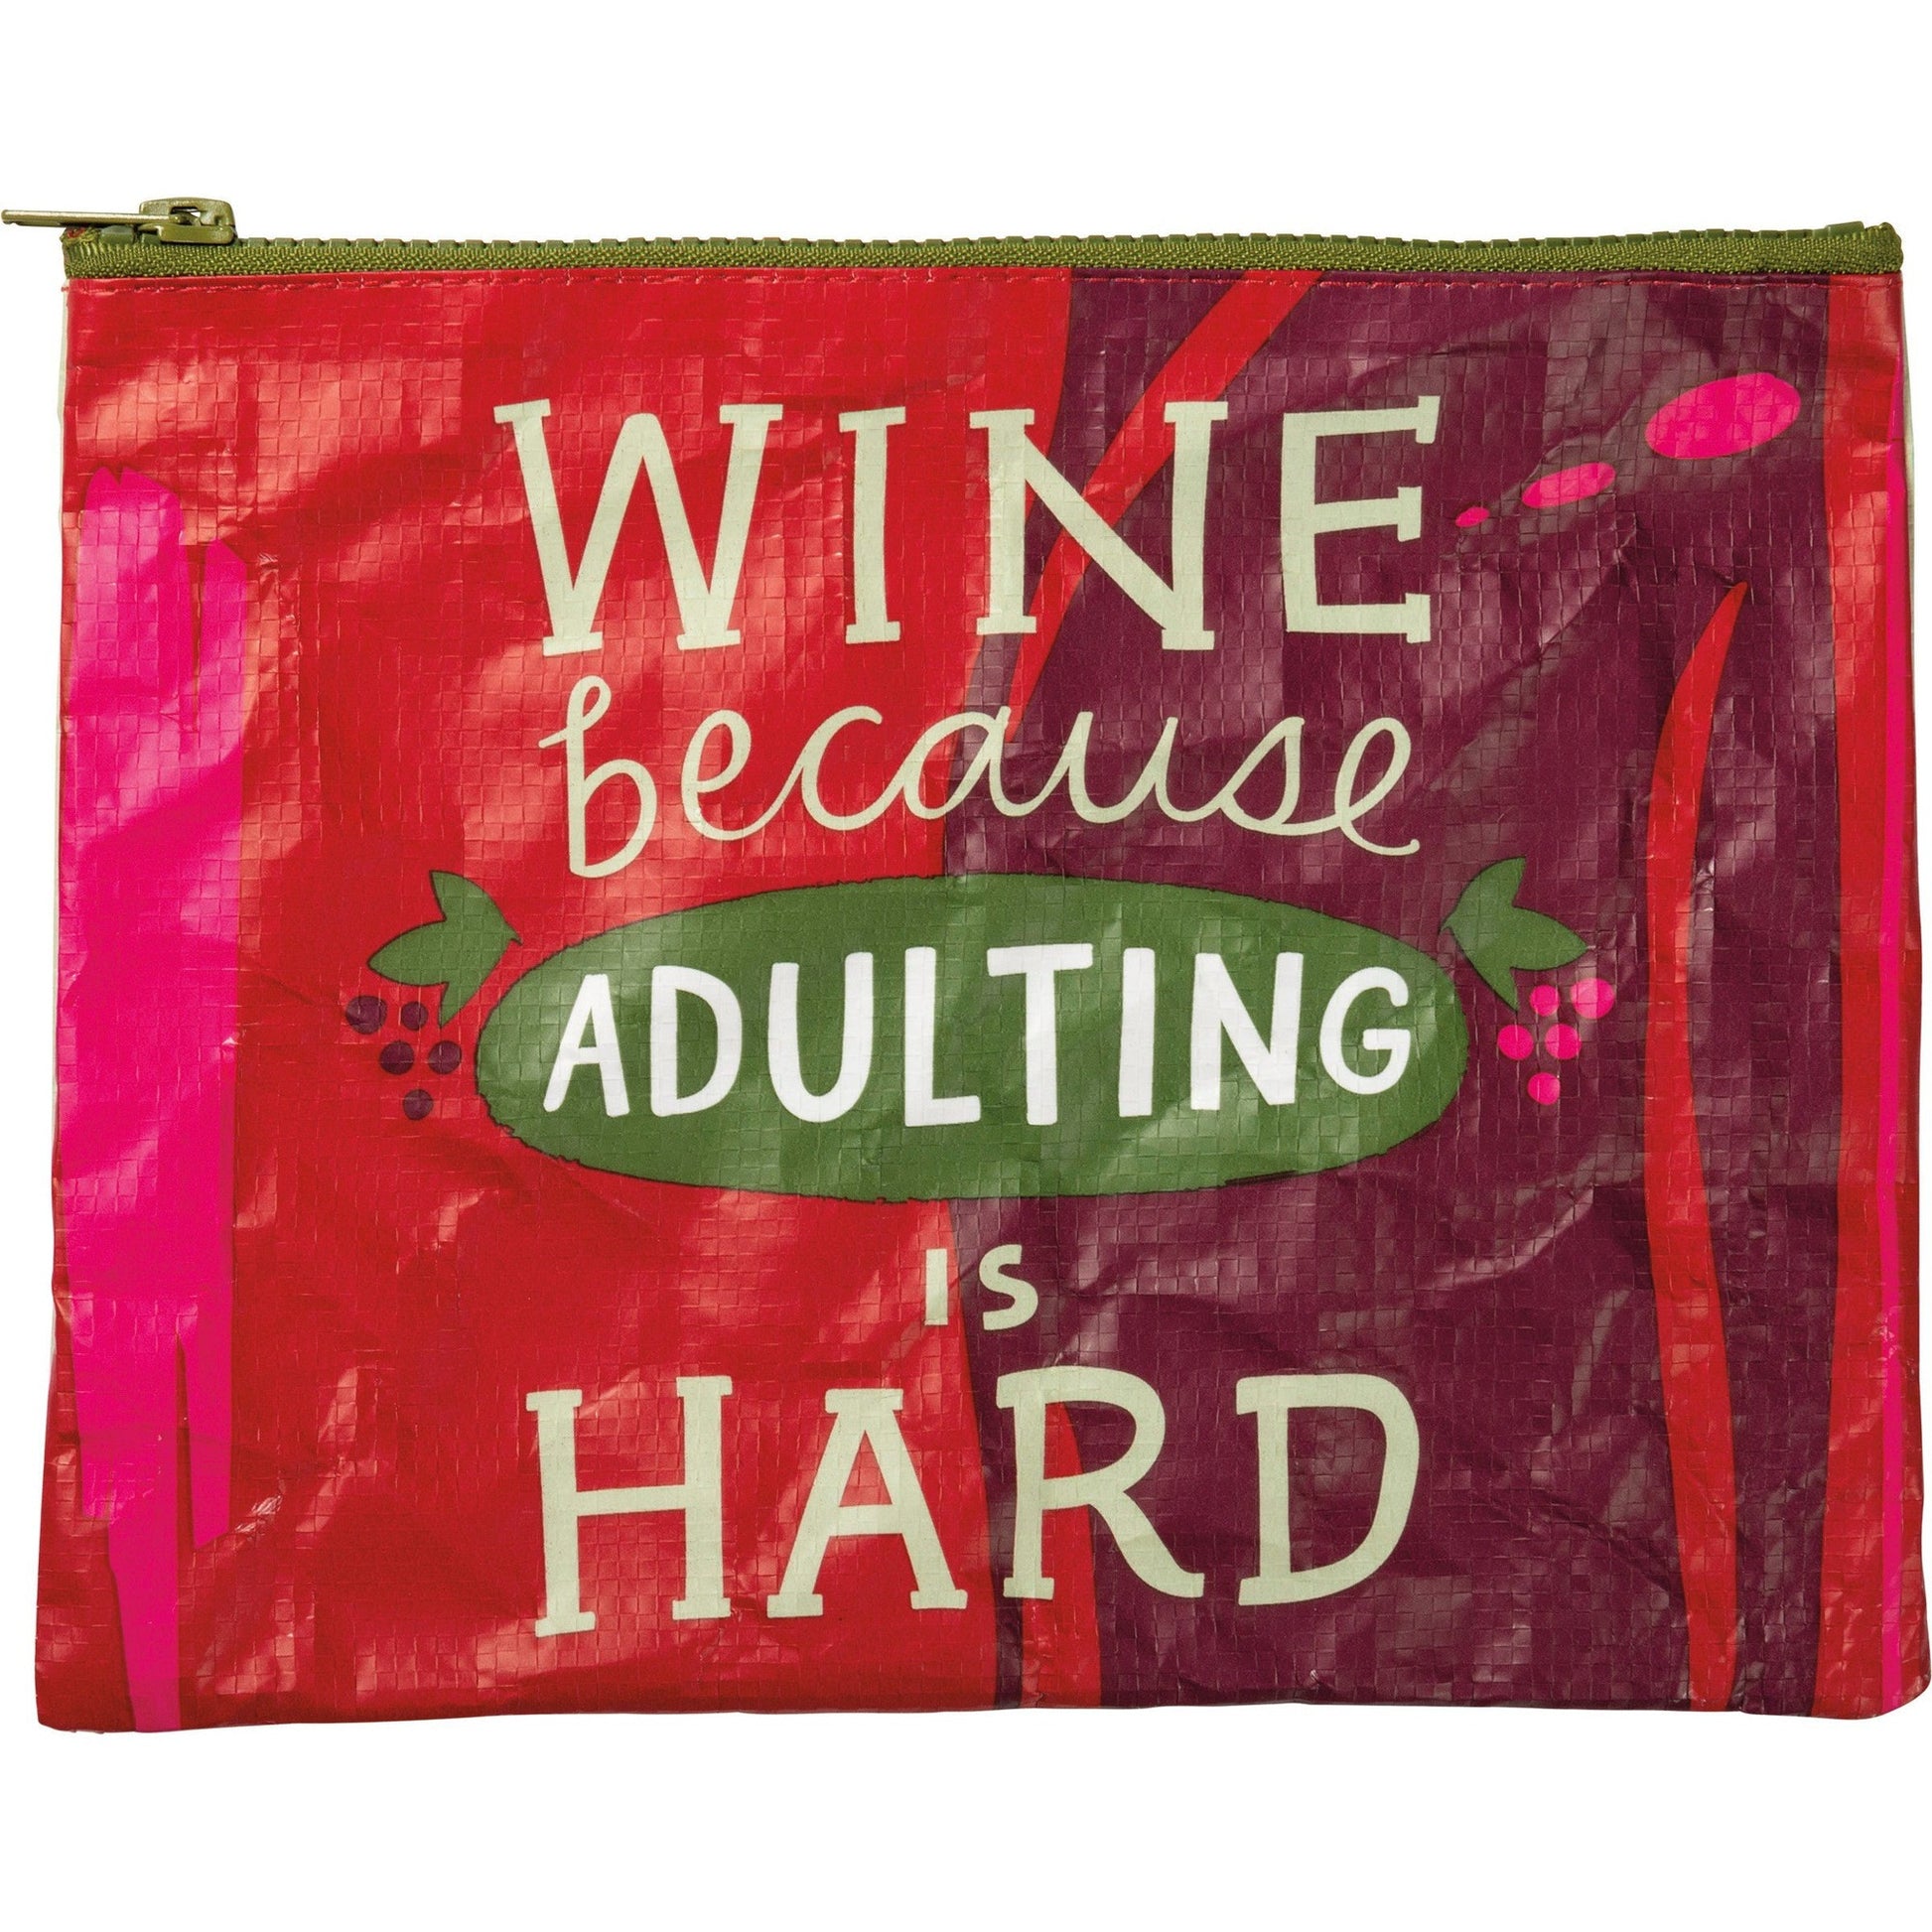 Wine Because Adulting Is Hard Recycled Material Cute/Cool/Unique Zipper Pouch/Bag/Clutch/Cosmetic Bag | 9.5" x 7"